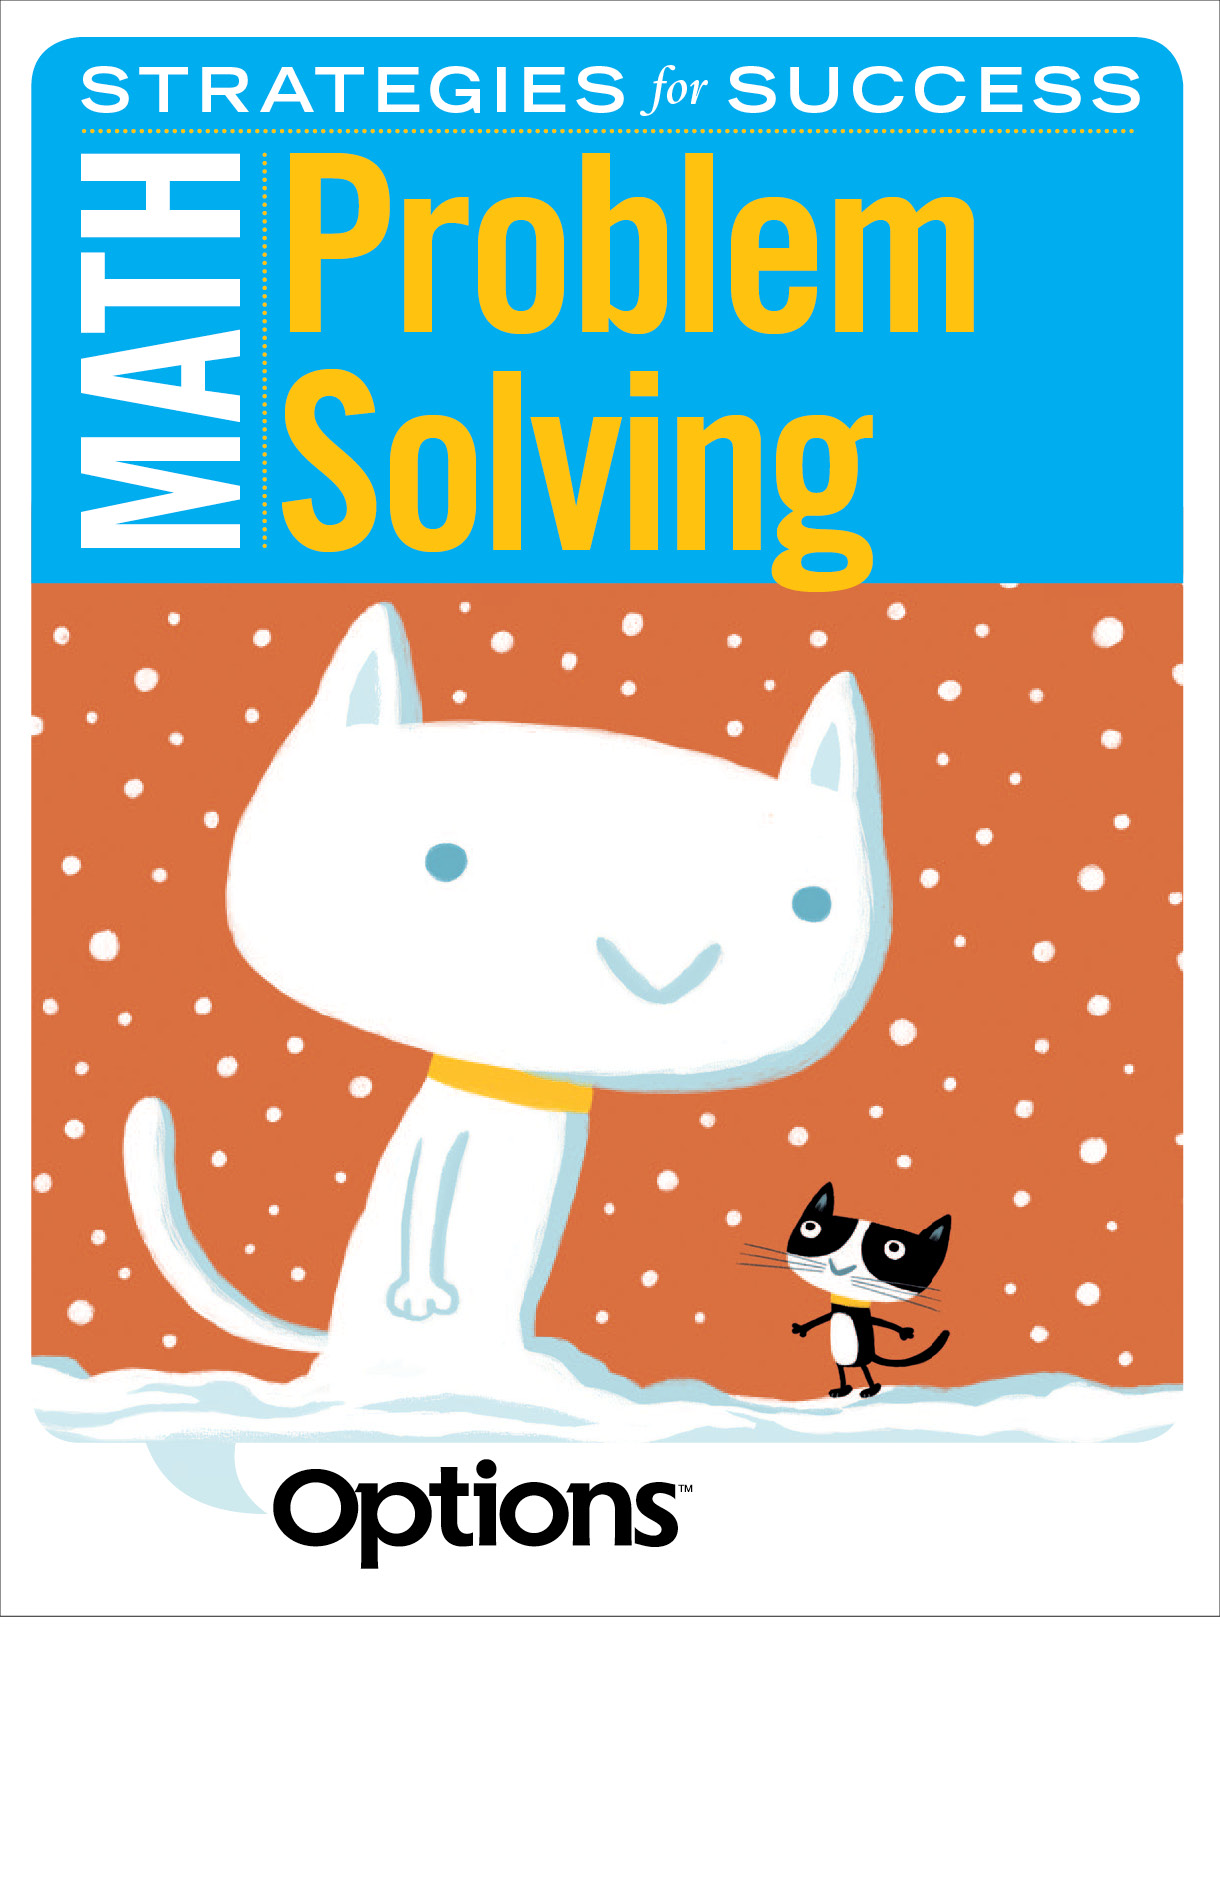 Book cover of Math Strategies for Success, Problem Solving. It has a large cat standing in the snow and a small cat looking up at it.